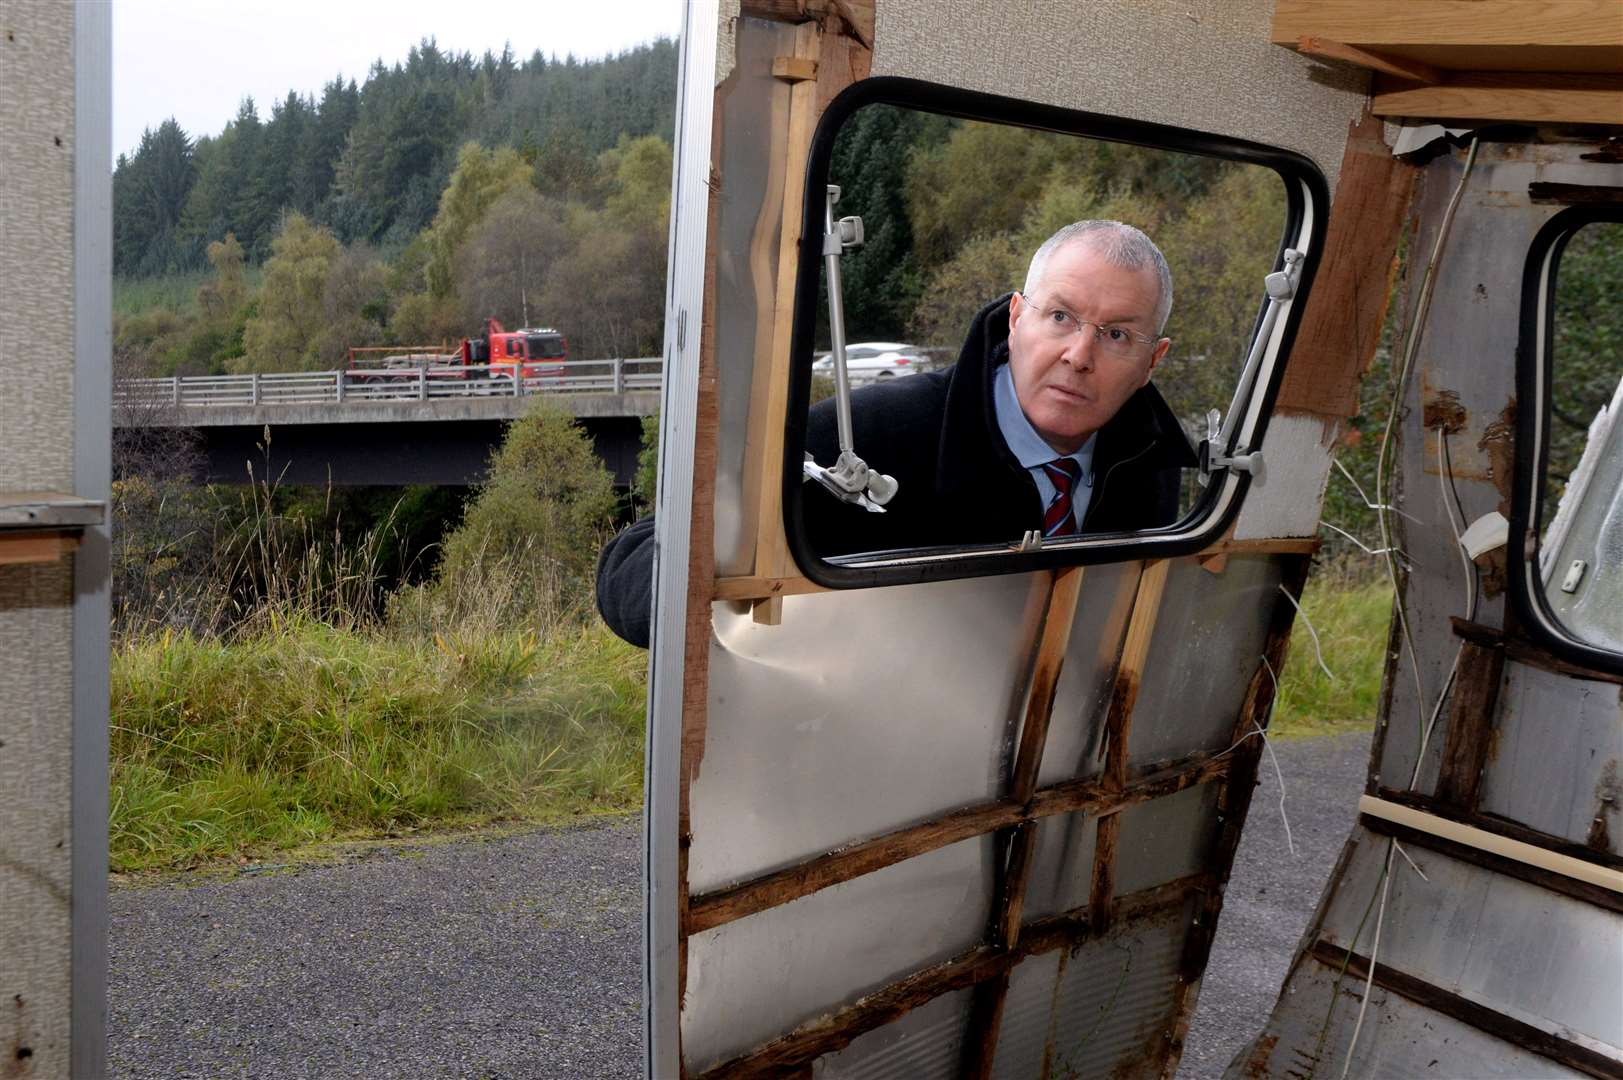 Wrecked caravan Daviot: Cllr Duncan Macpherson looking inside the abandoned caravan. A9 bridge over the River Nairn visible in background.Picture: James Mackenzie.